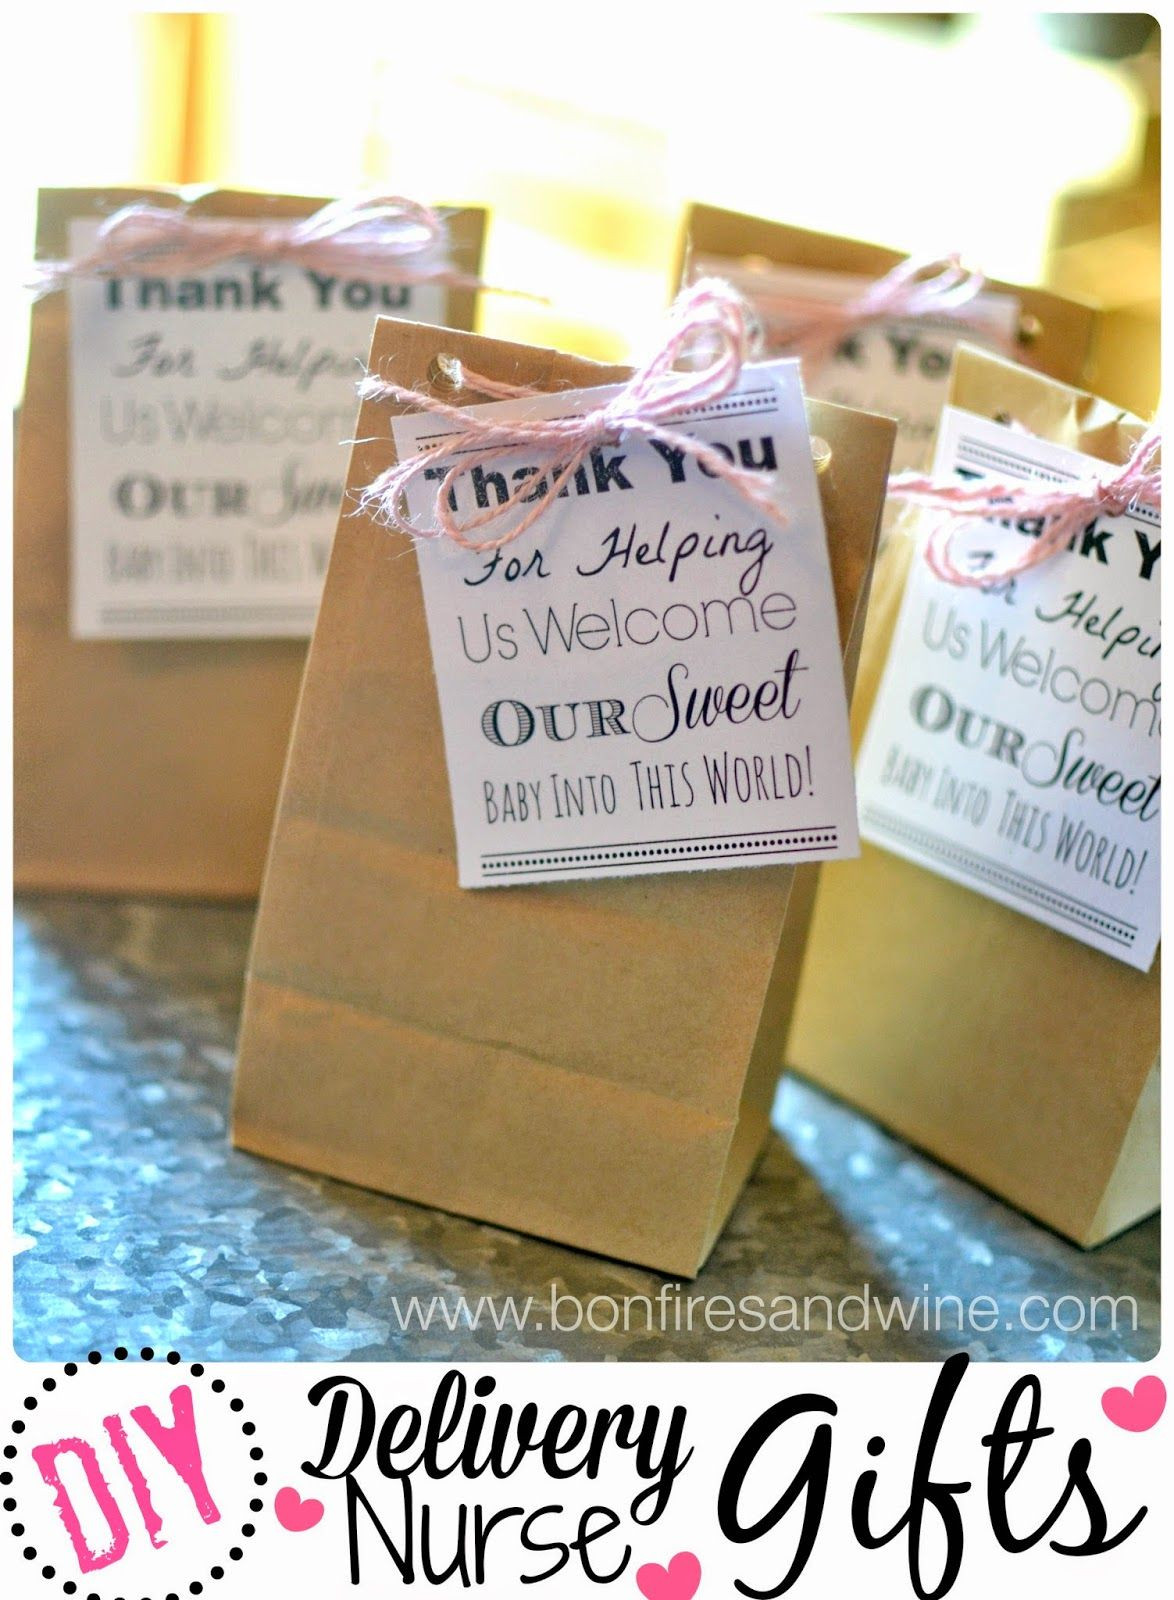 Thank You Delivery Gift Ideas
 DIY Labor and Delivery Nurse Gifts Love this wording